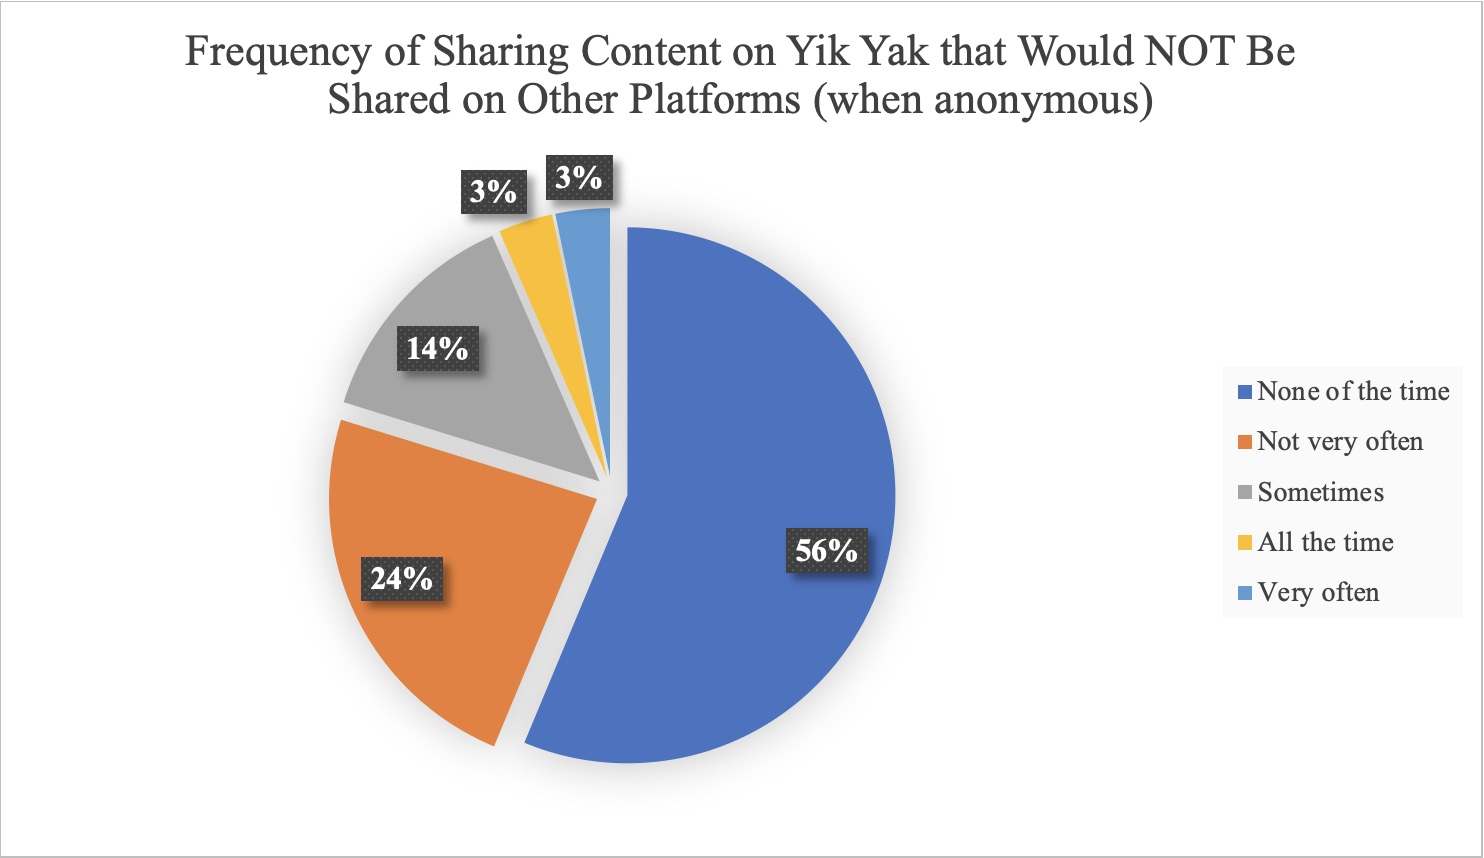 Pie chart depicts survey results regarding users' frequency for sharing content on Yik Yak (when anonymous) that they would also share on other platforms.